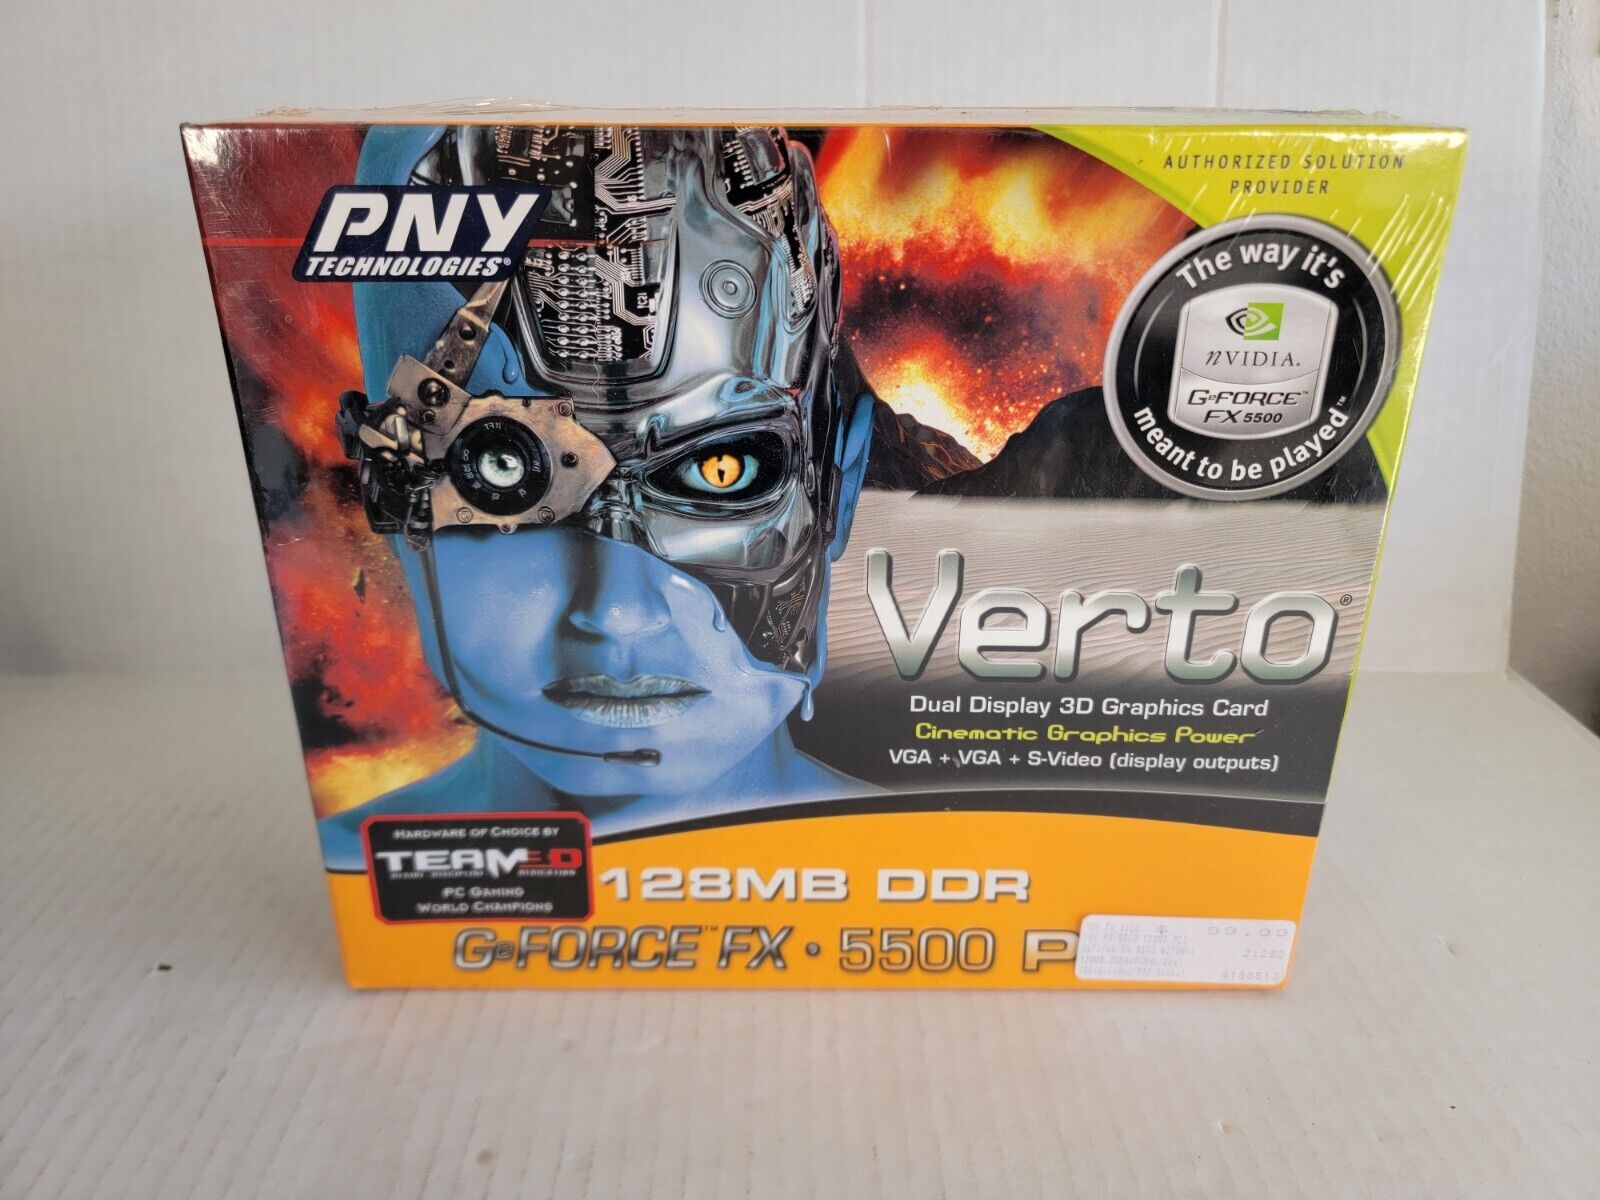 PNY Technologies Verto GeForce Fx 5500 (VCGFX55PPB) 128MB DDR Graphics Card